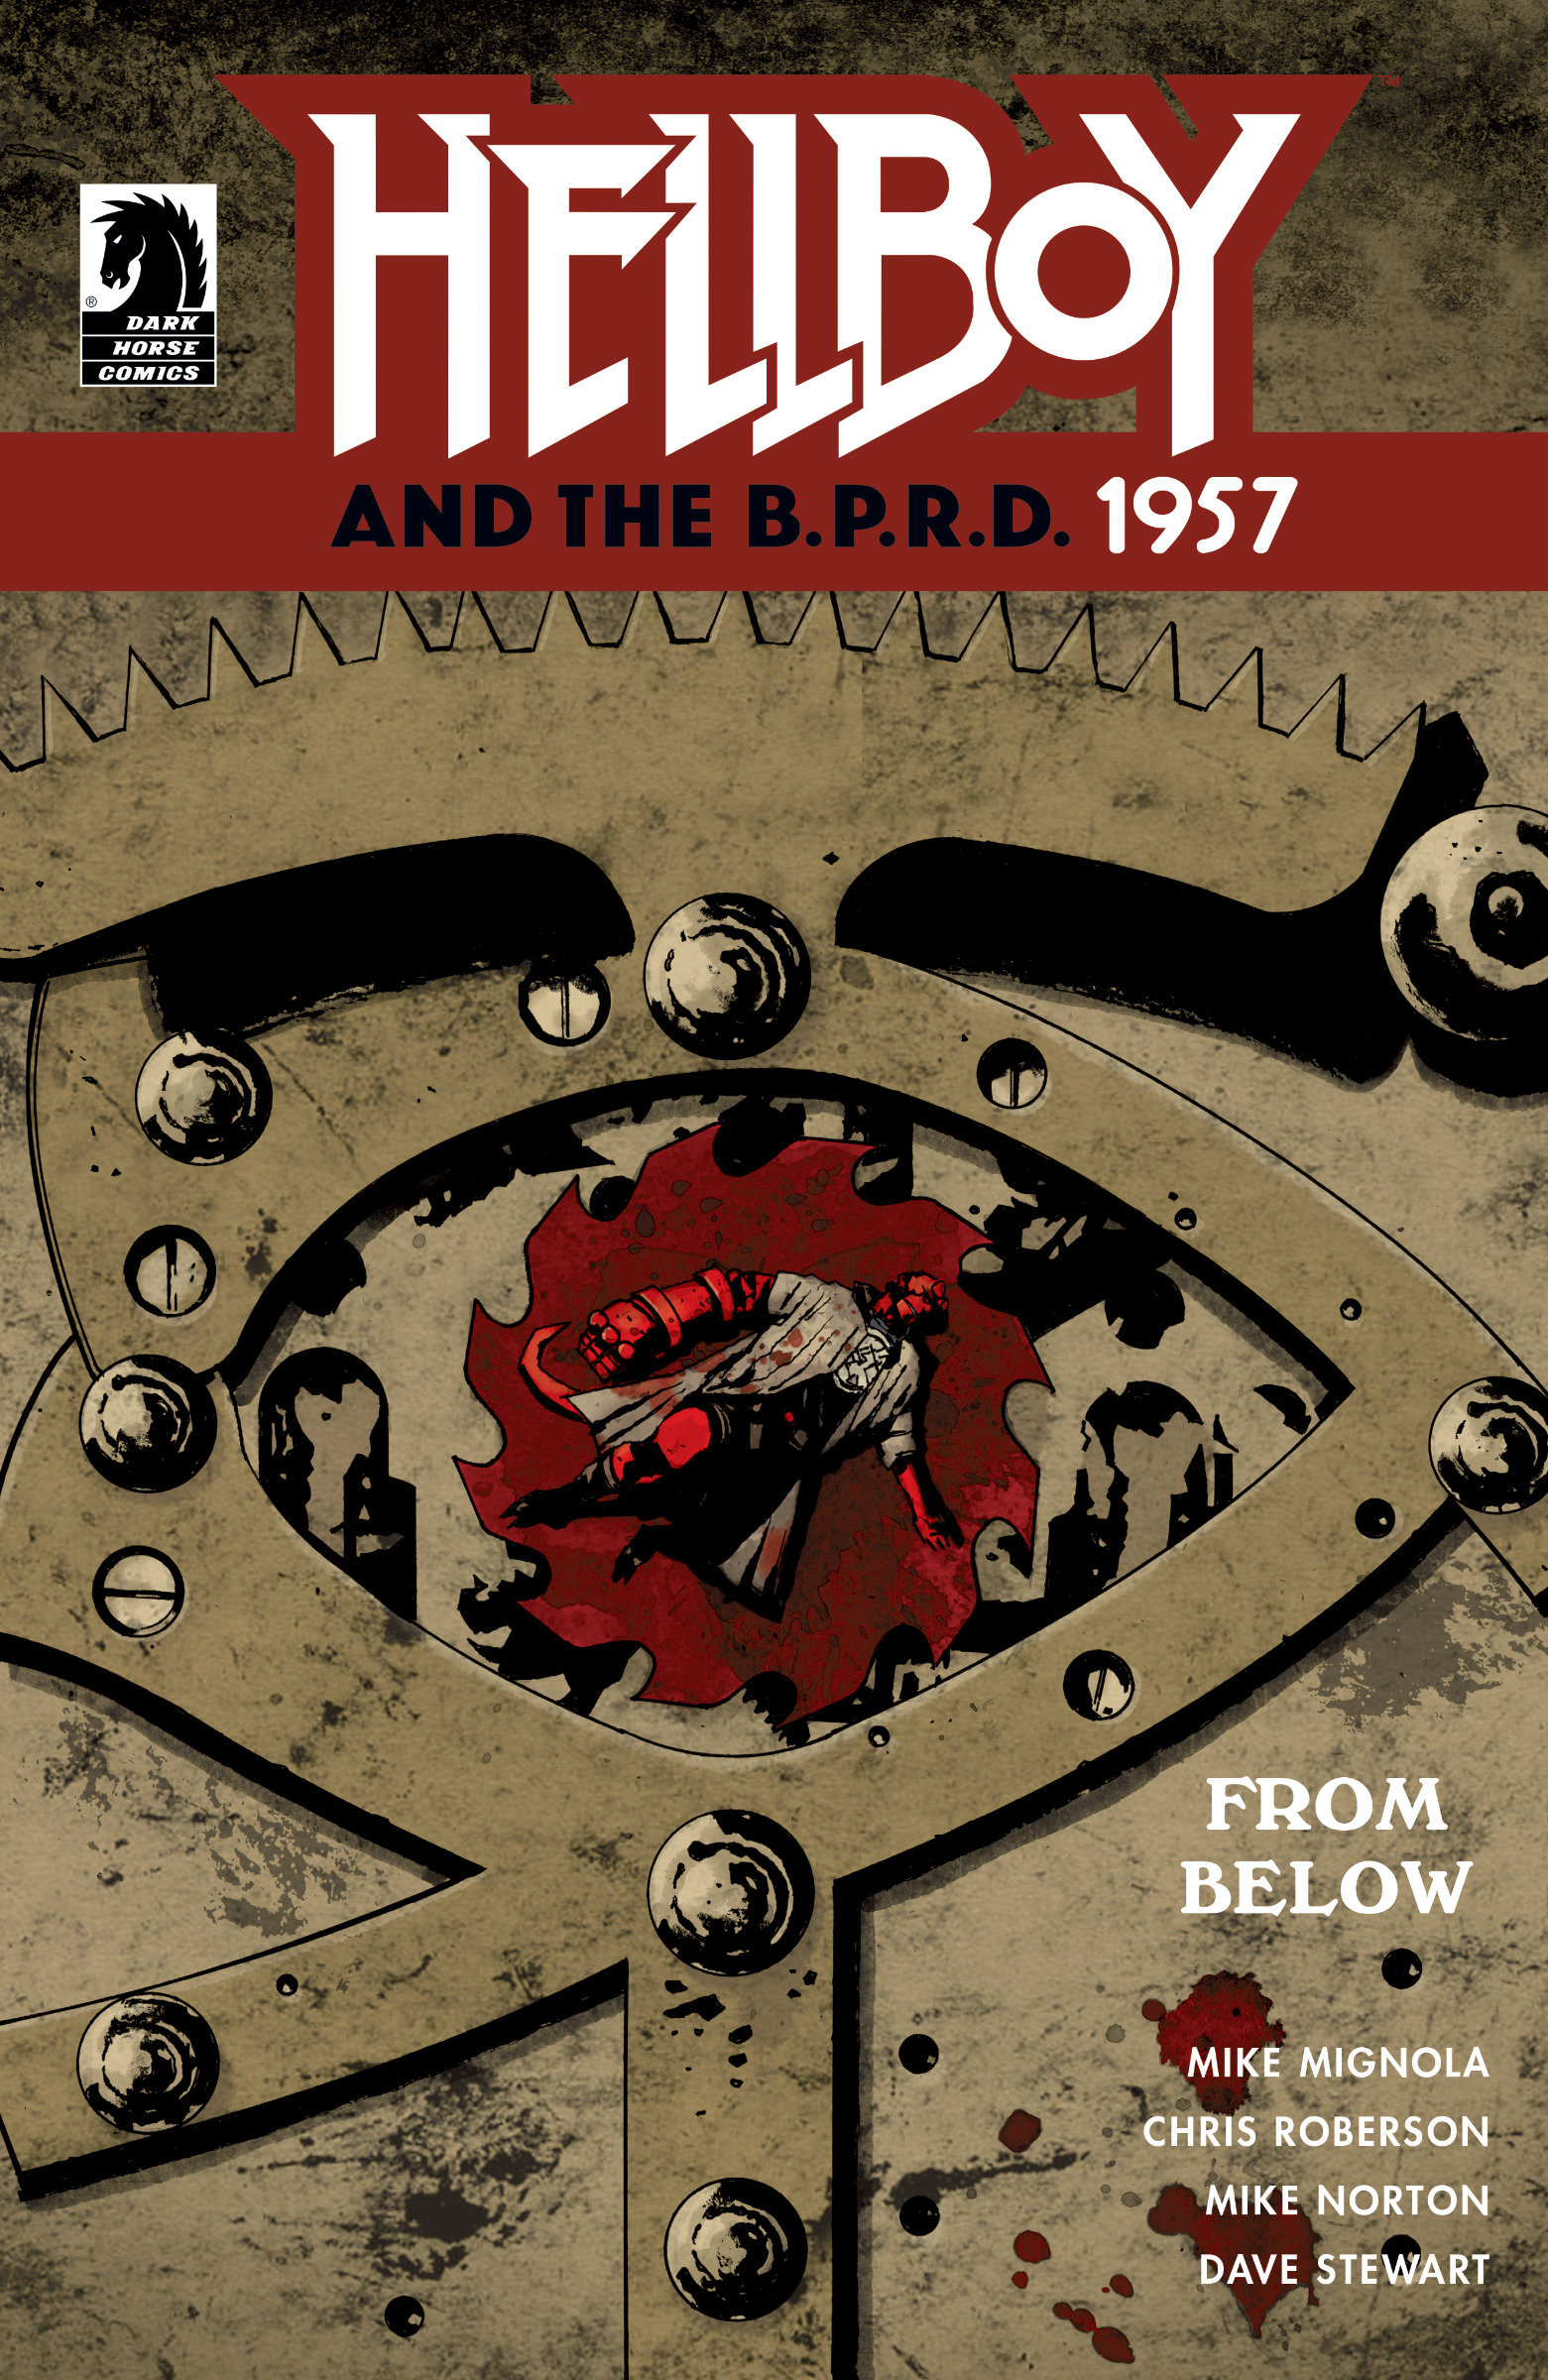 Hellboy & the B.P.R.D. Ongoing #60 Hellboy & B.P.R.D. 1957 From Below One-Shot